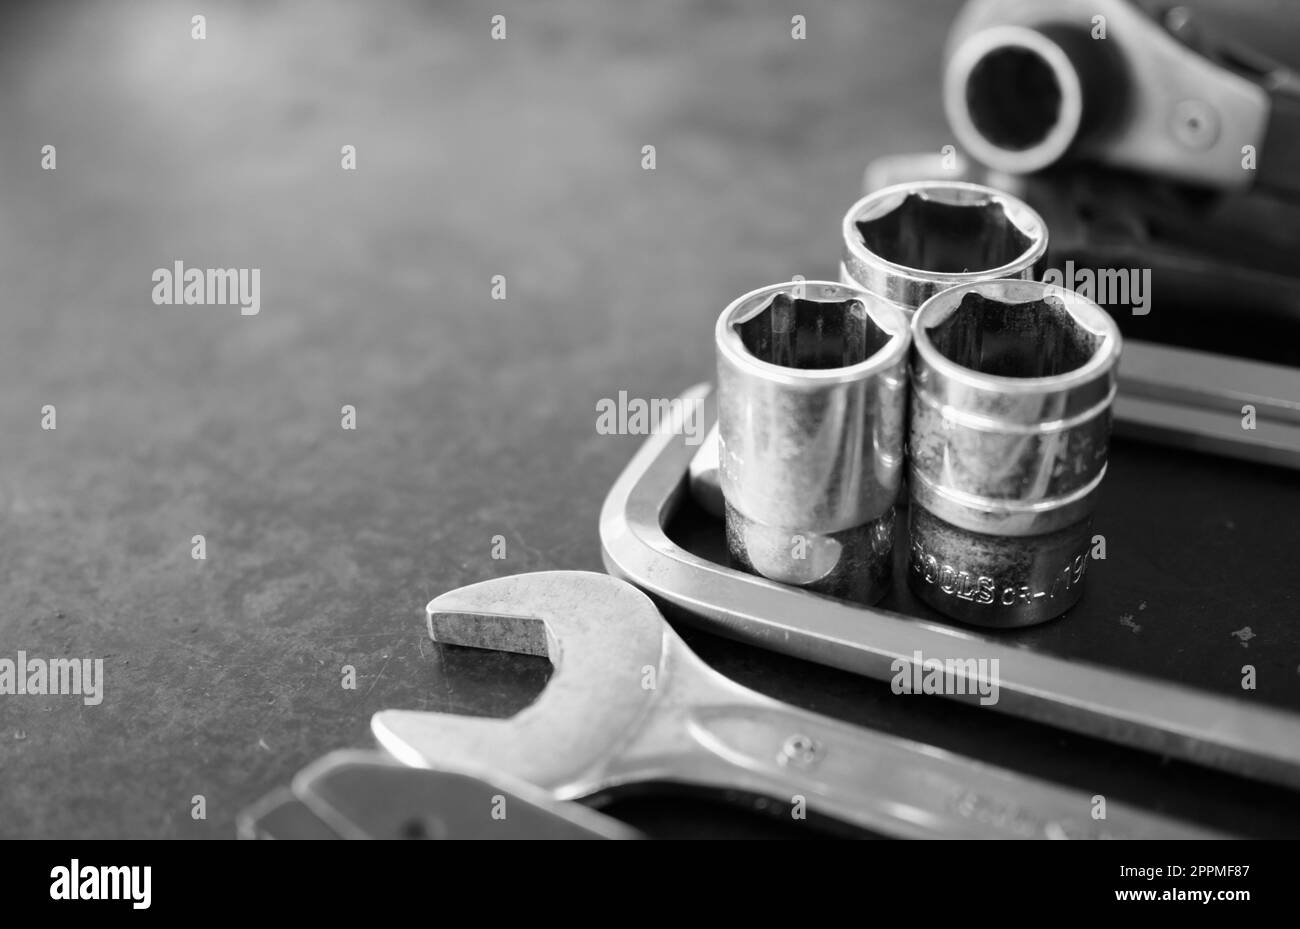 Hand tools consisting of wrenches, pliers, socket wrenches, laid out on old steel plate background. Stock Photo